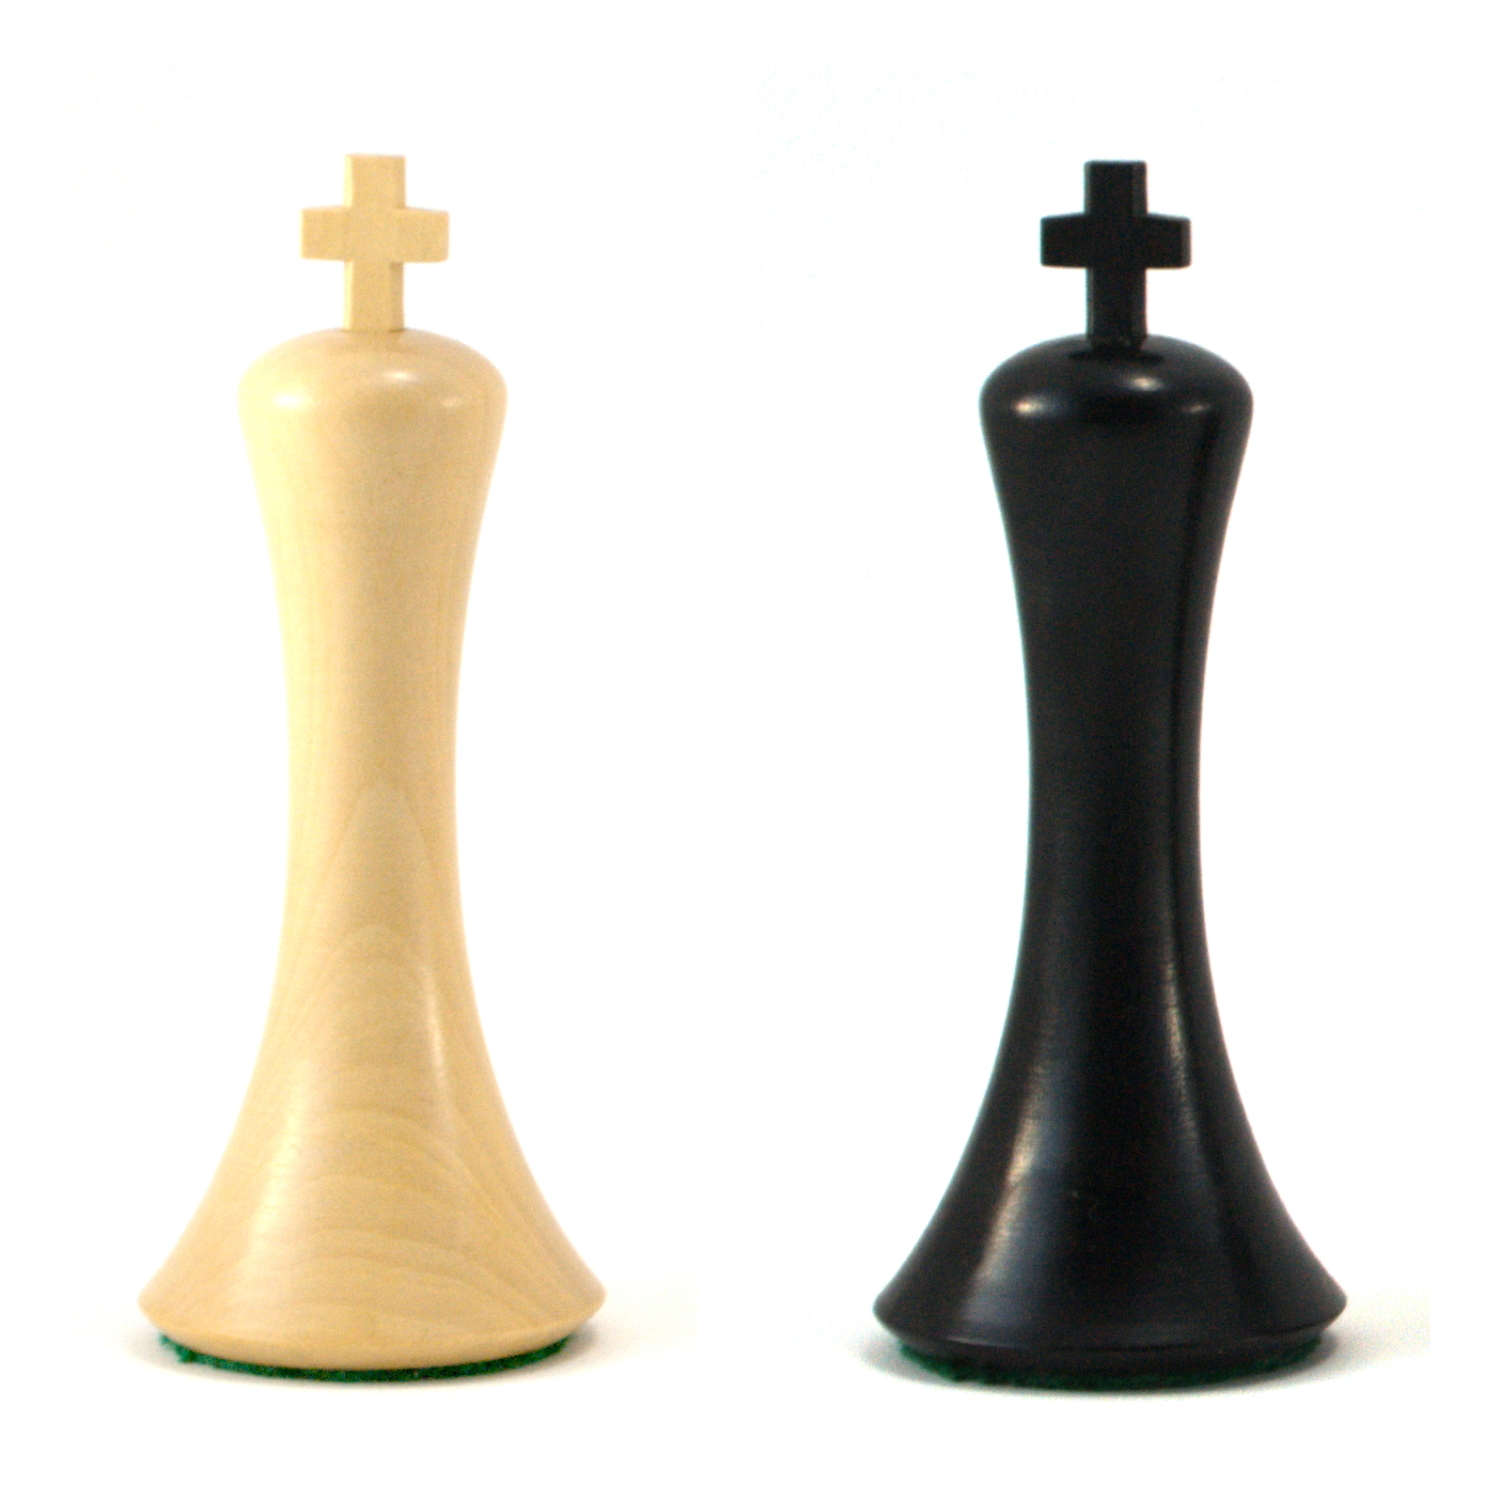 elzr/blag: Self-exemplifying chess pieces